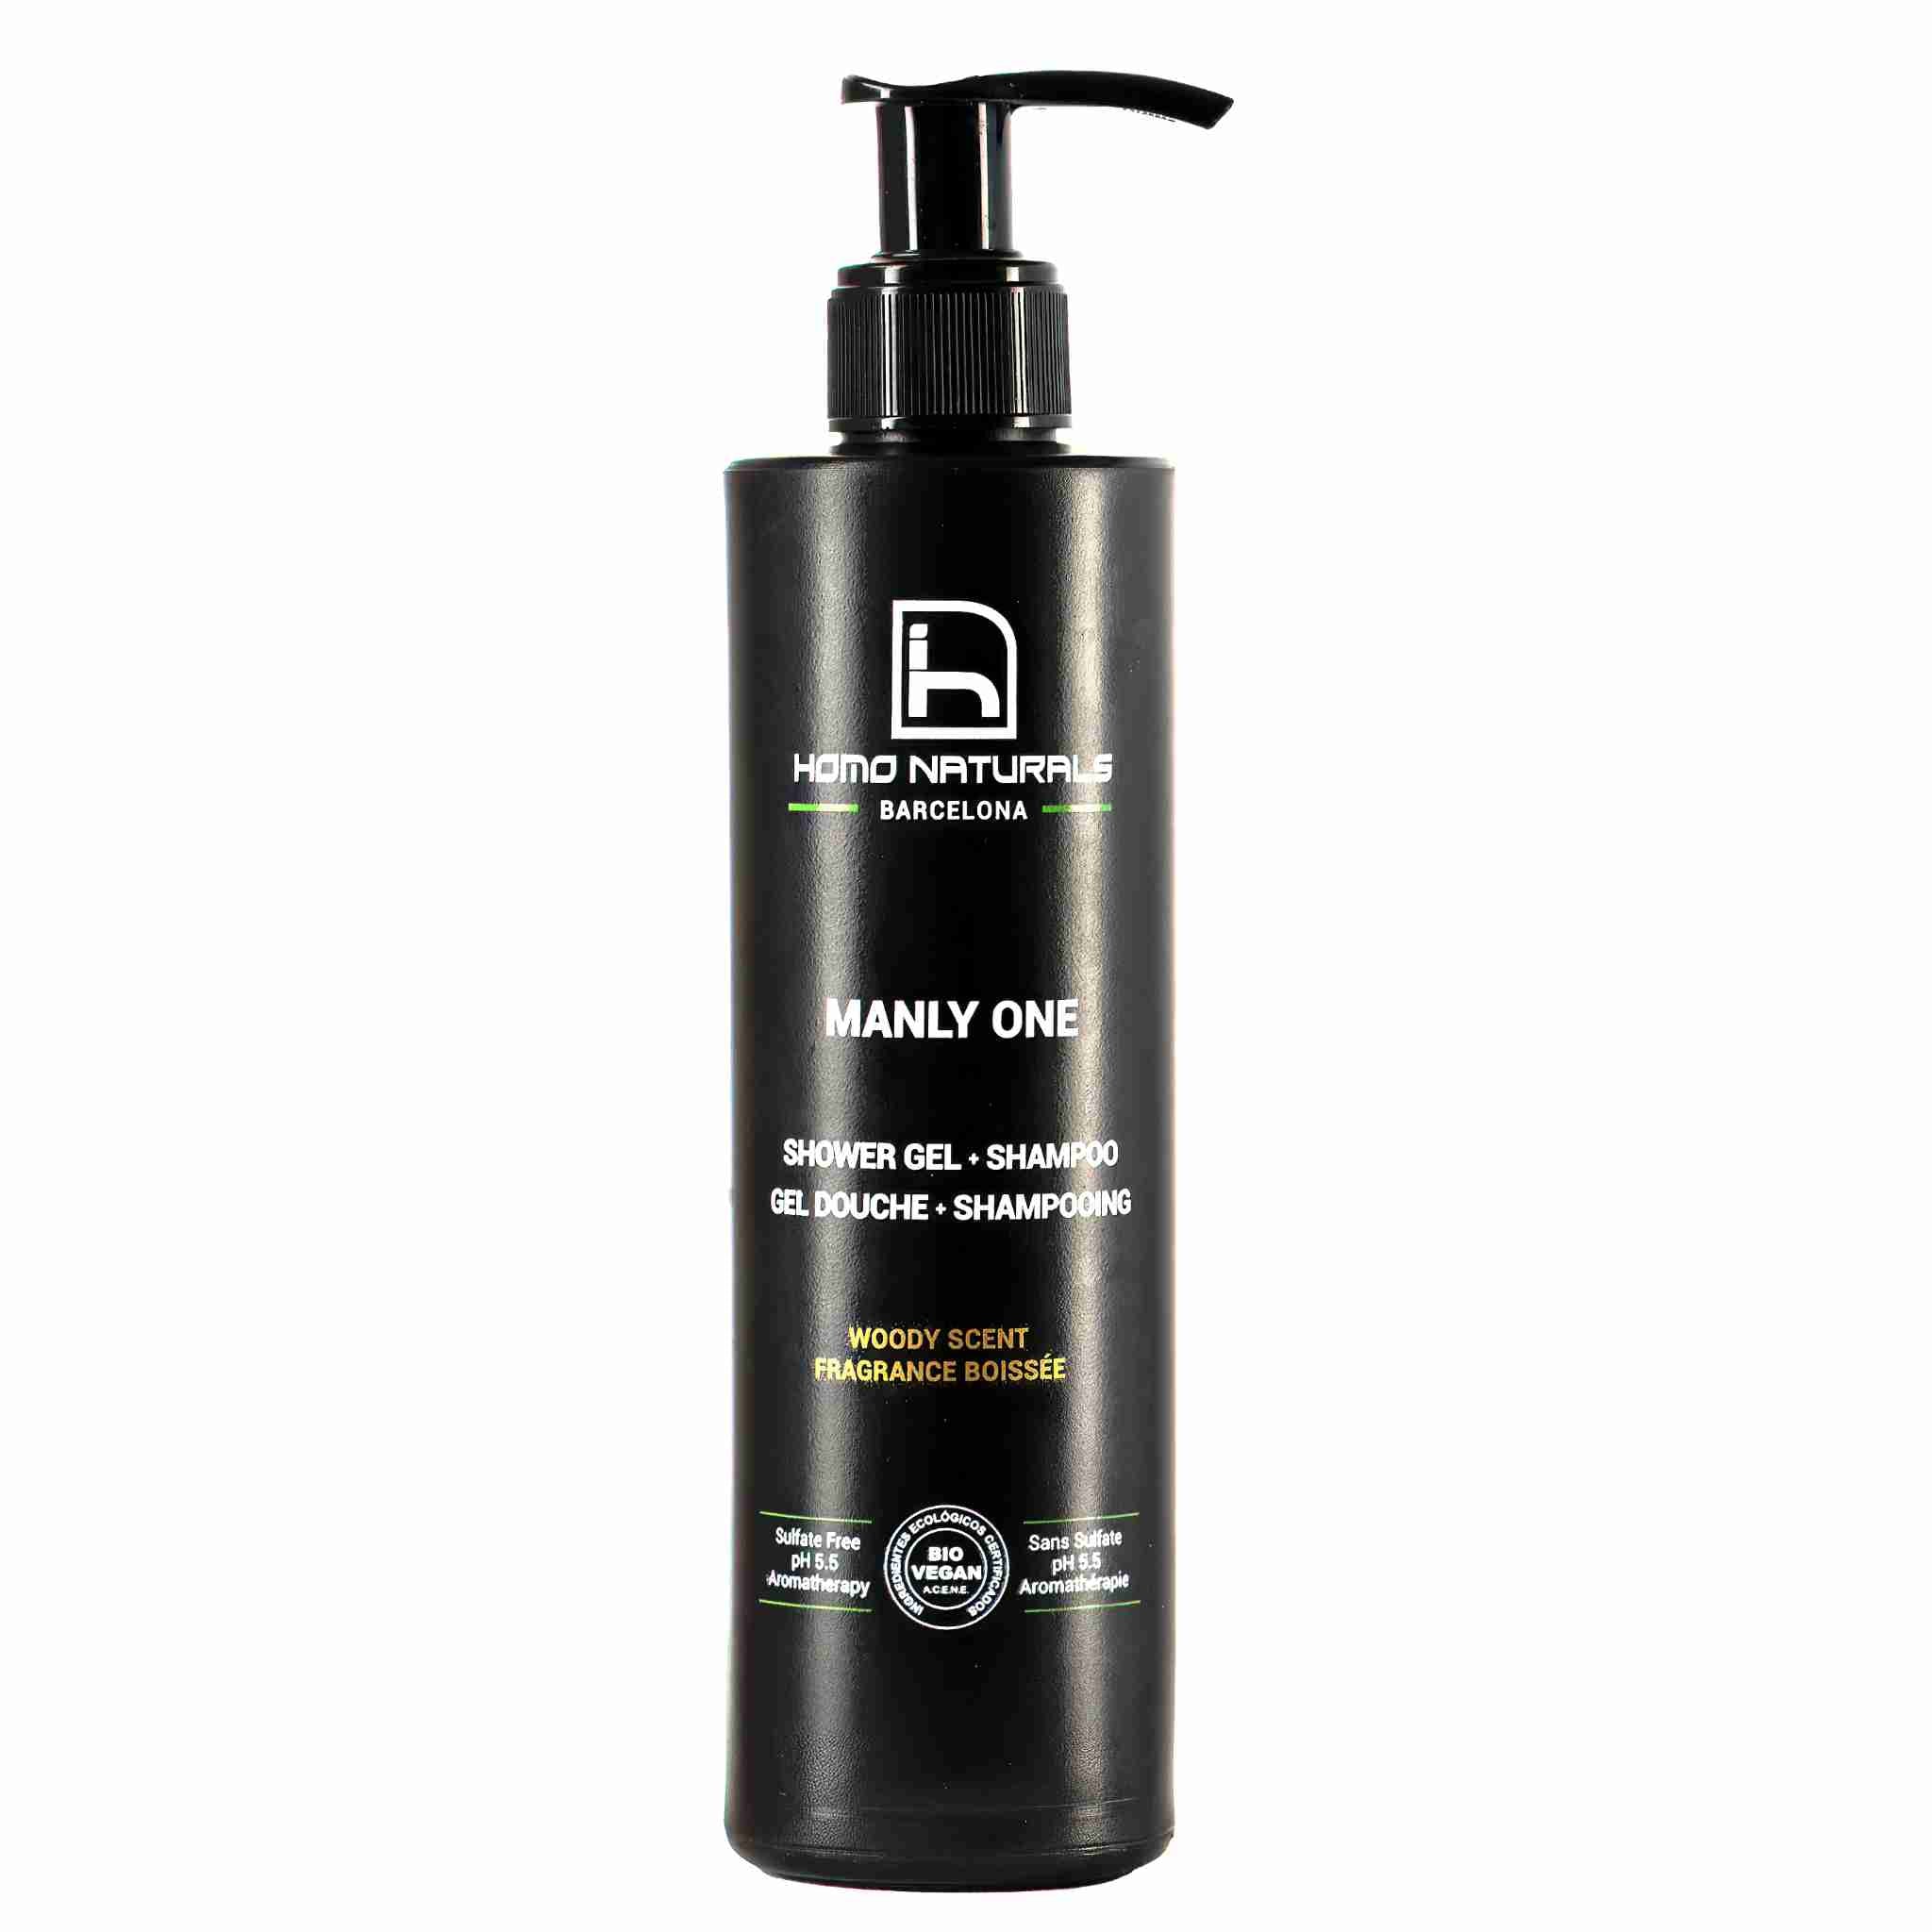 Shower gel for men. Natural and ecological. Shower gel + shampoo 2 in 1. Sulfate-free. pH 5. With chamomile. Soothing and dermoprotective. Bio and Vegan Certified